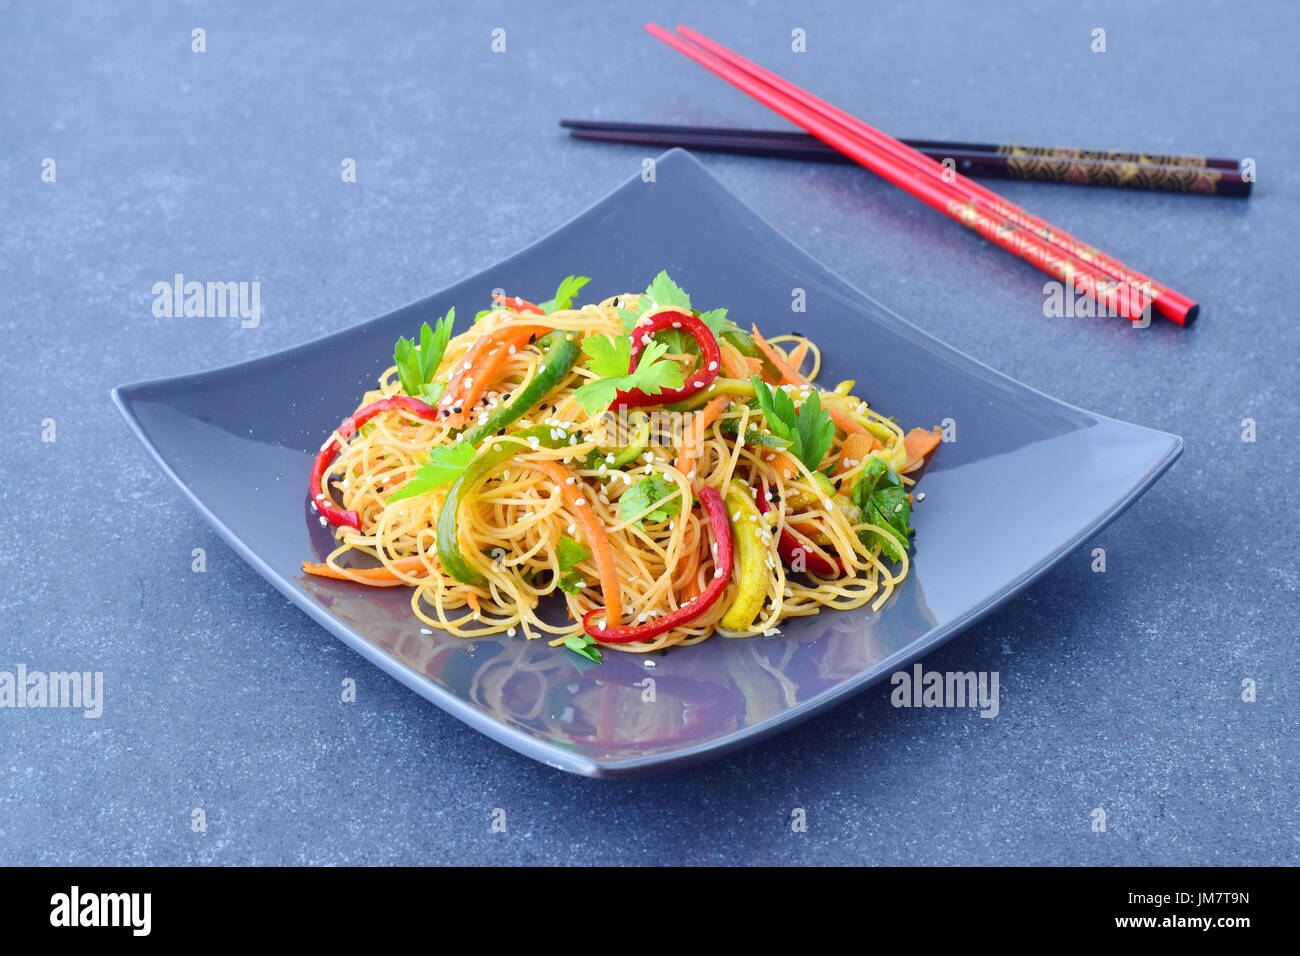 A grey ceramic plate with noodles and vegetables on a grey abstract background. Asian food. Healthy eating concept Stock Photo